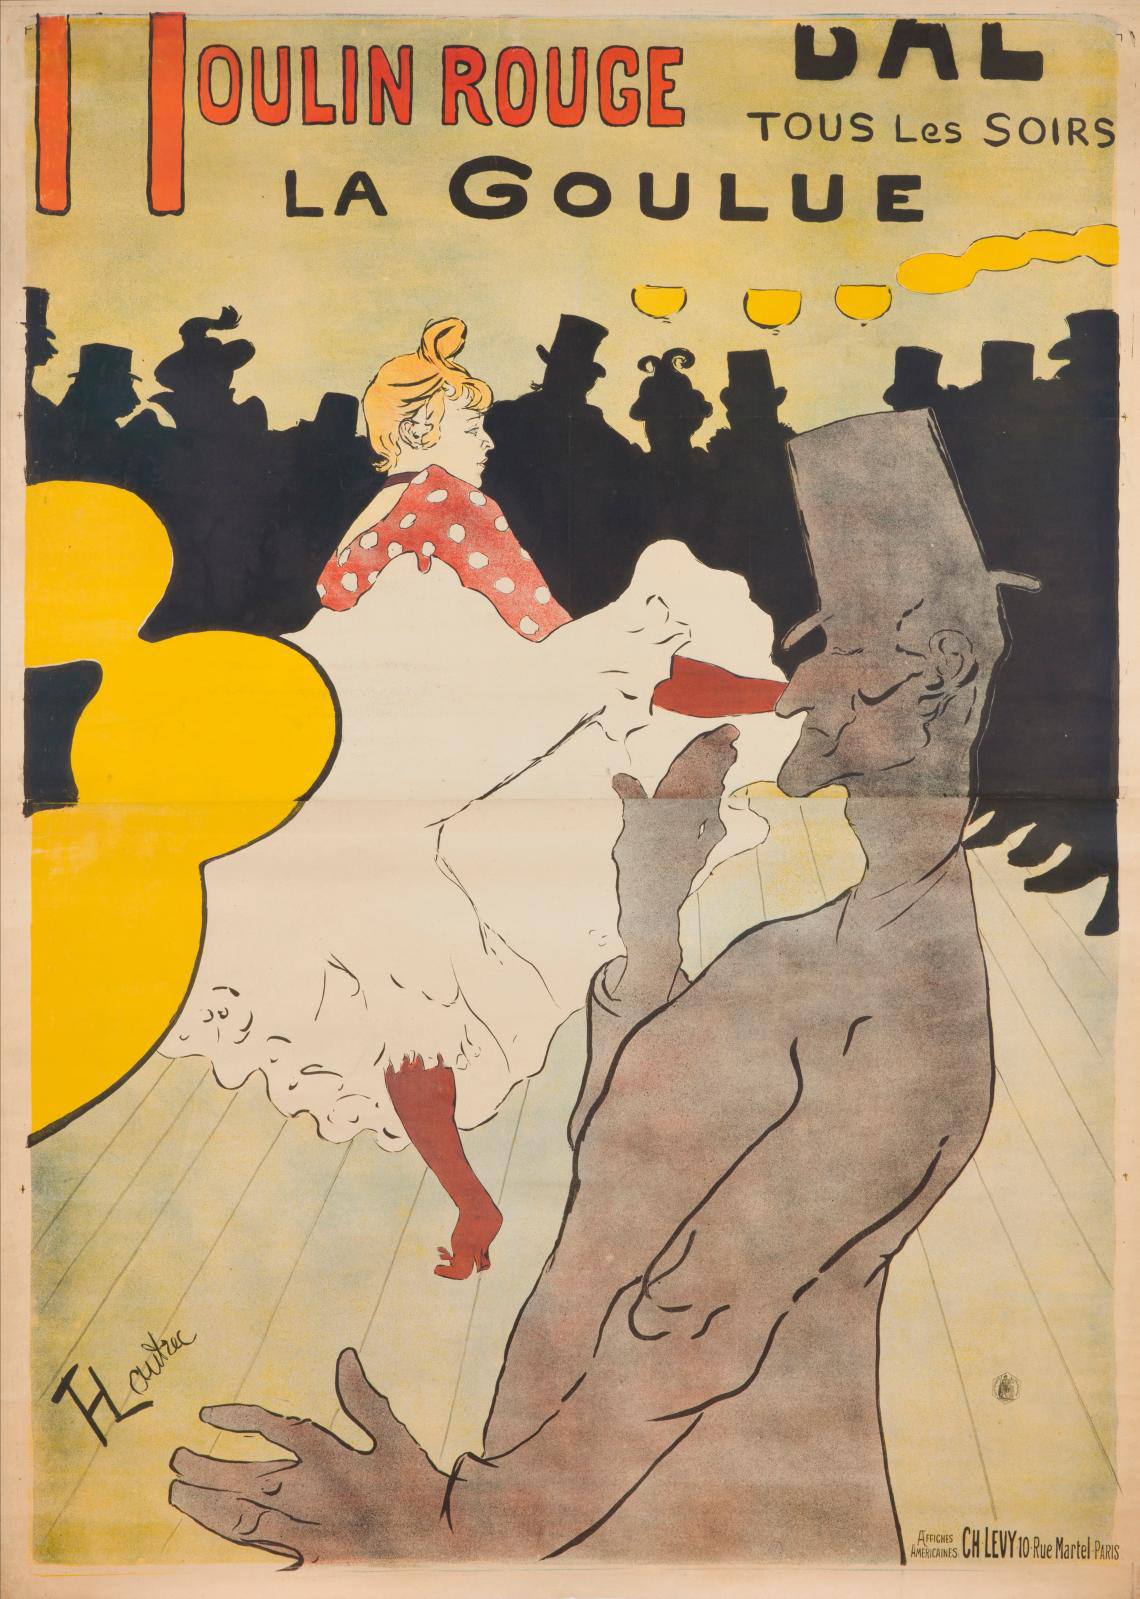 Affectionately nicknamed "the little man" by the can-can girls of the famous Parisian cabaret, Henri de Toulouse-Lautrec (1864-1901) recei